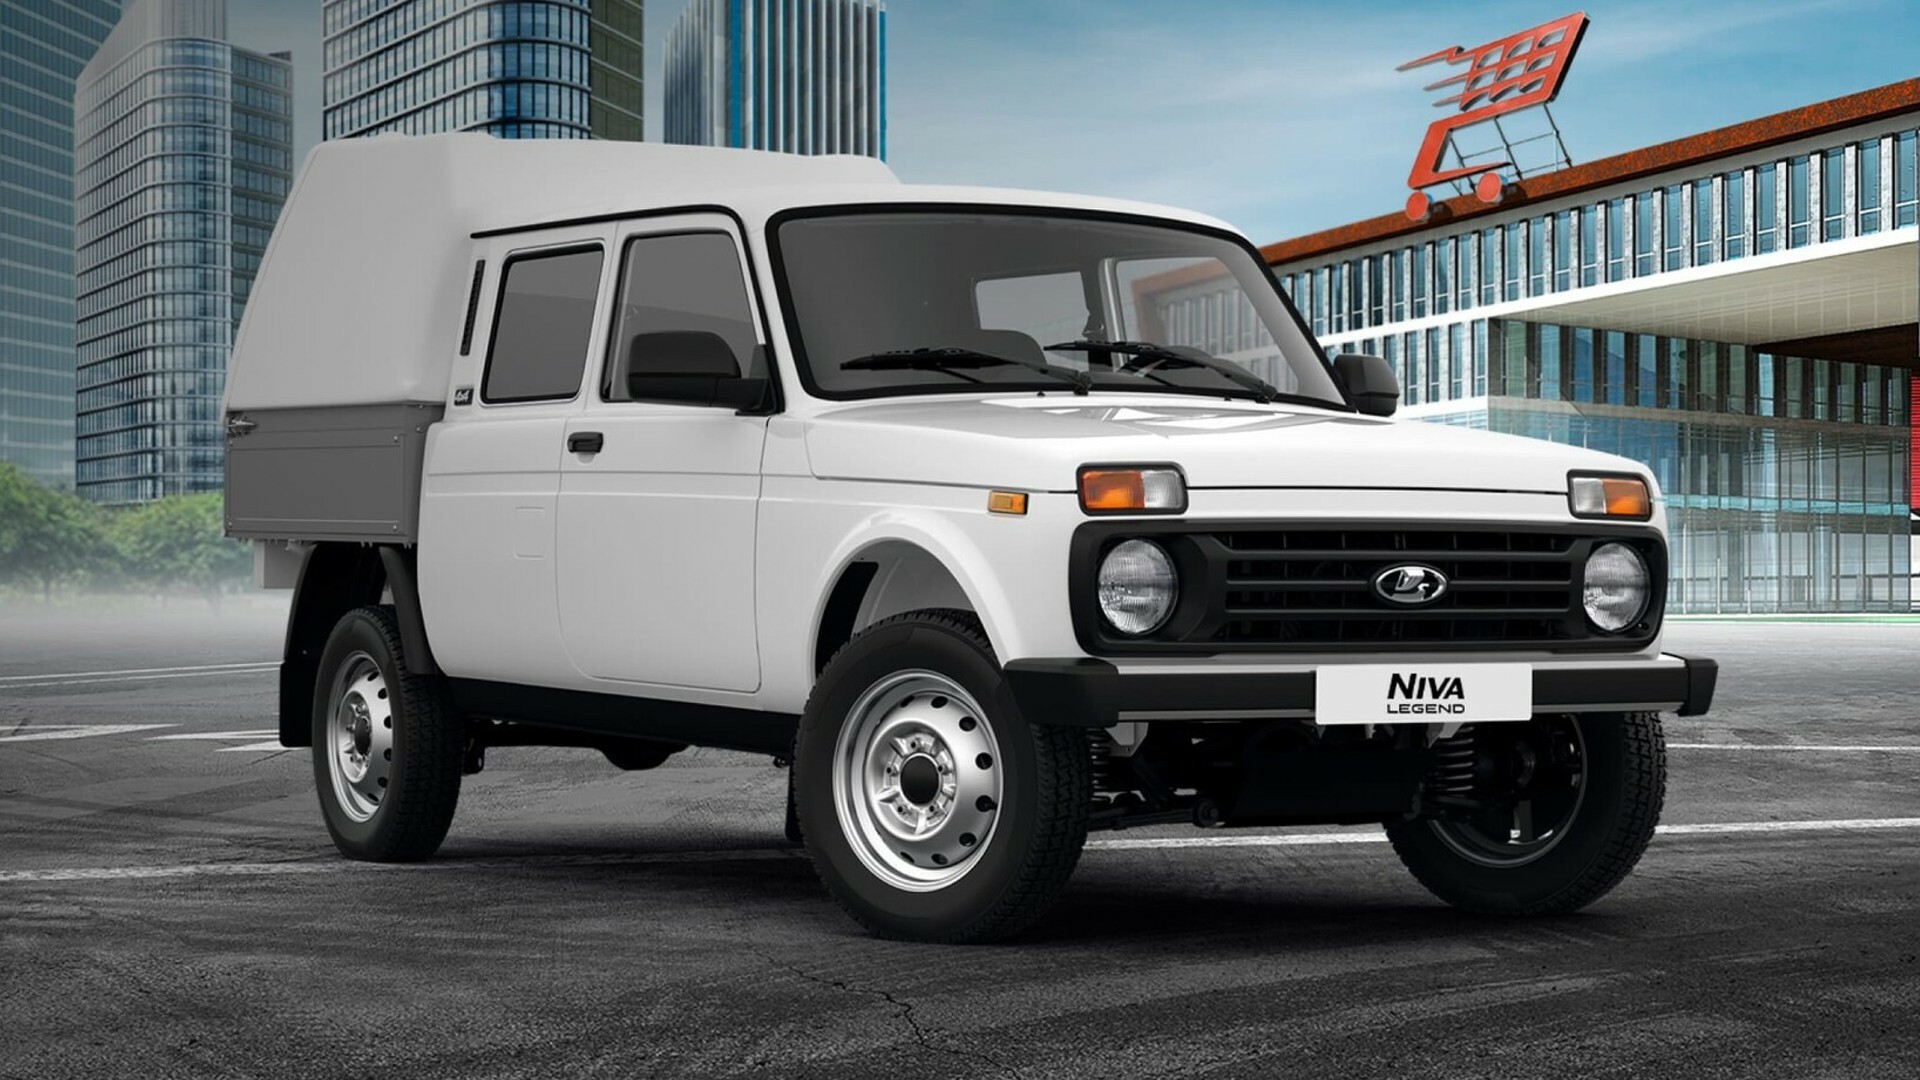 Lada Shows Upgraded Lcvs Based On The Ancient Niva | Carscoops